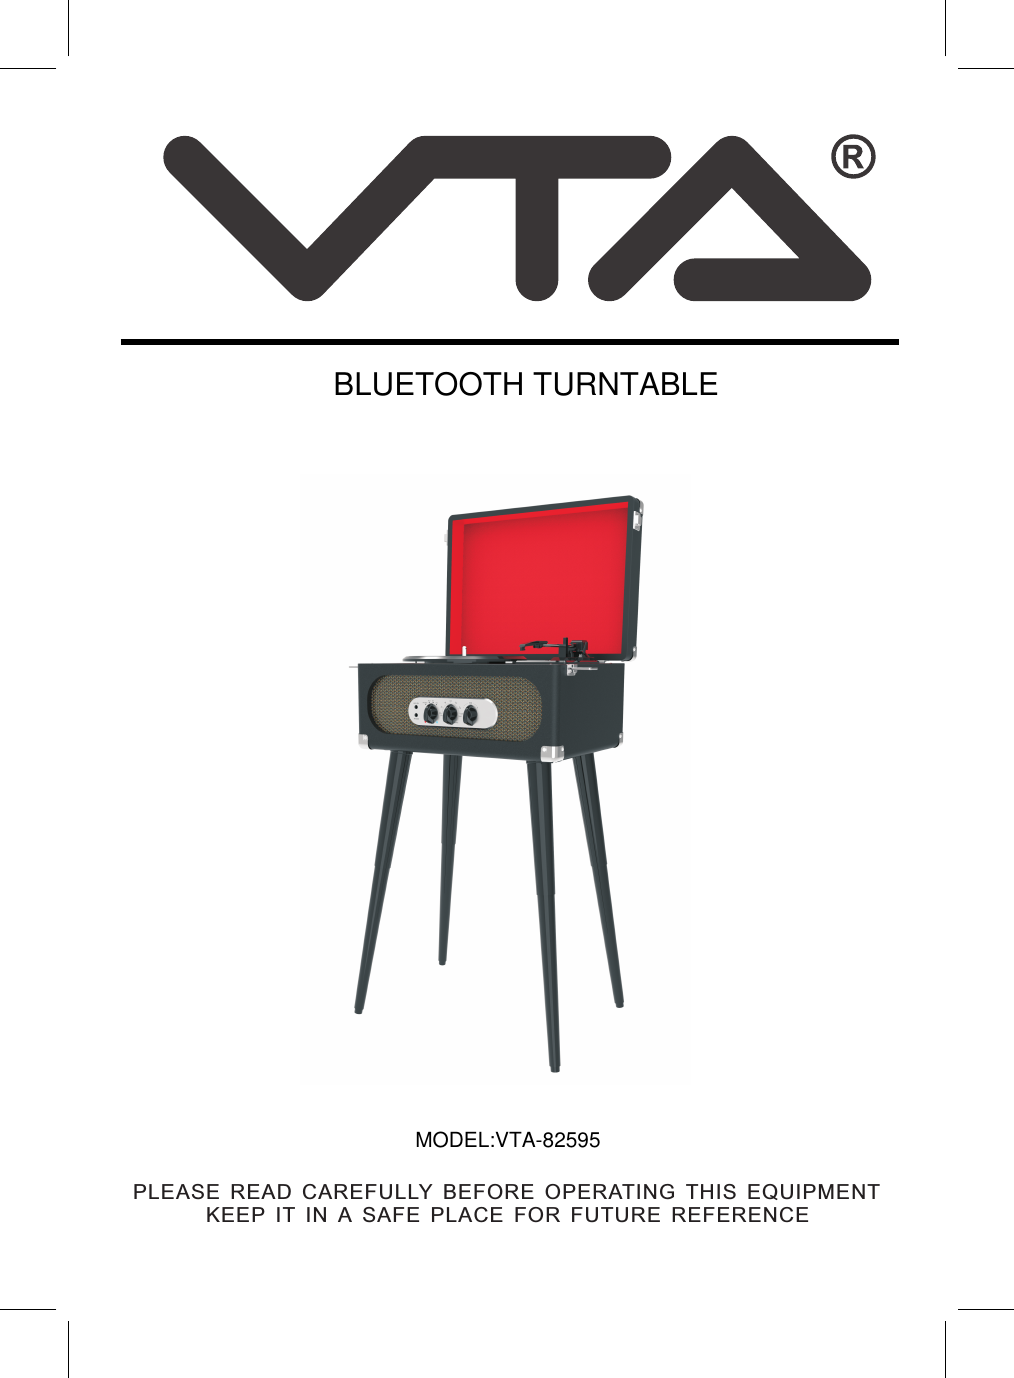 PLEASE READ CAREFULLY BEFORE OPERATING THIS EQUIPMENTKEEP IT IN A SAFE PLACE FOR FUTURE REFERENCEMODEL:VTA-82595BLUETOOTH TURNTABLE